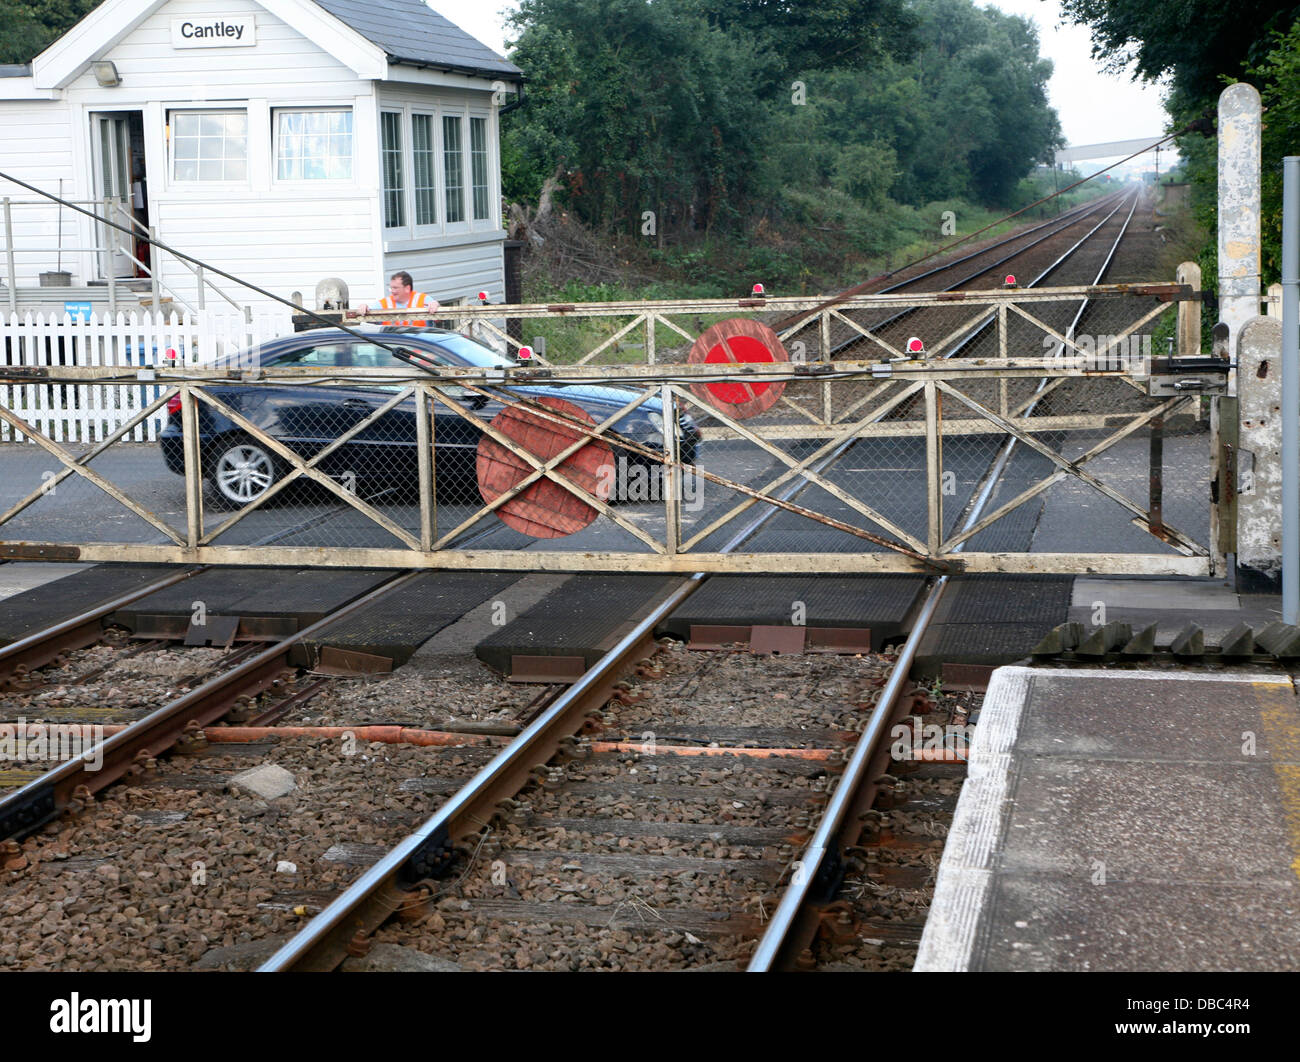 Manually operated railway level crossing at Cantley, Norfolk, England Stock Photo